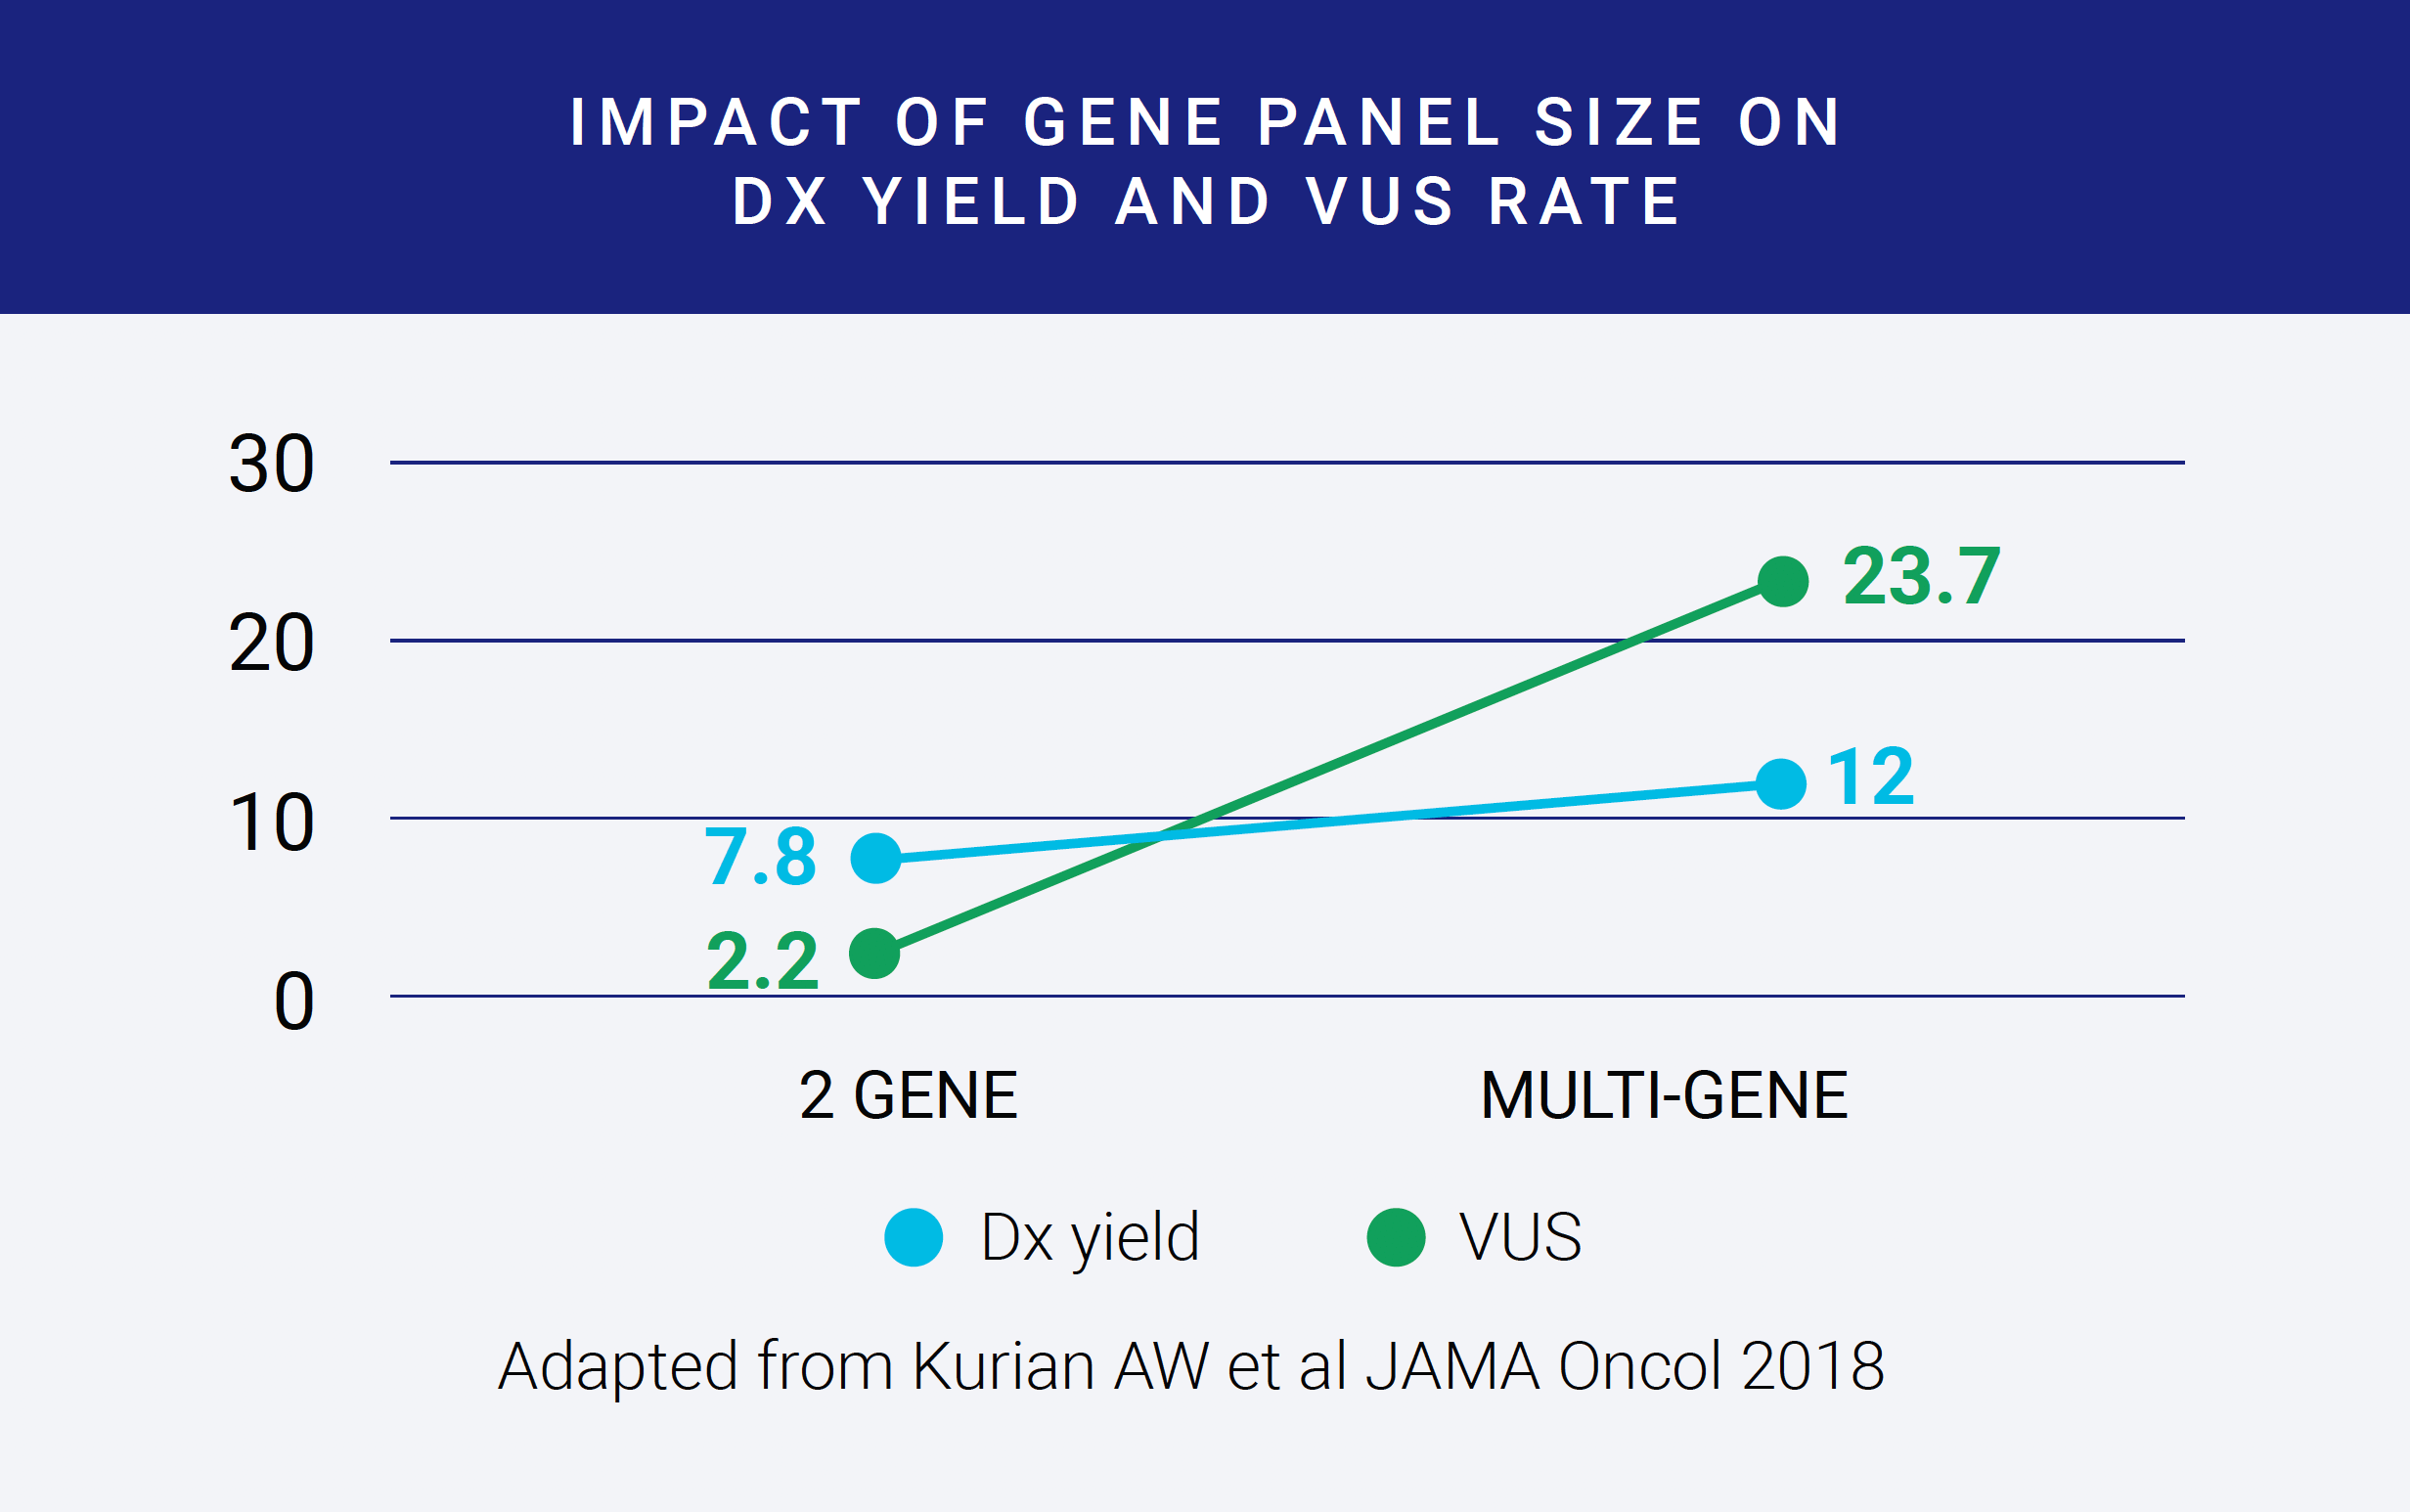 Impact of gene panel size on DX yield and VUS rate